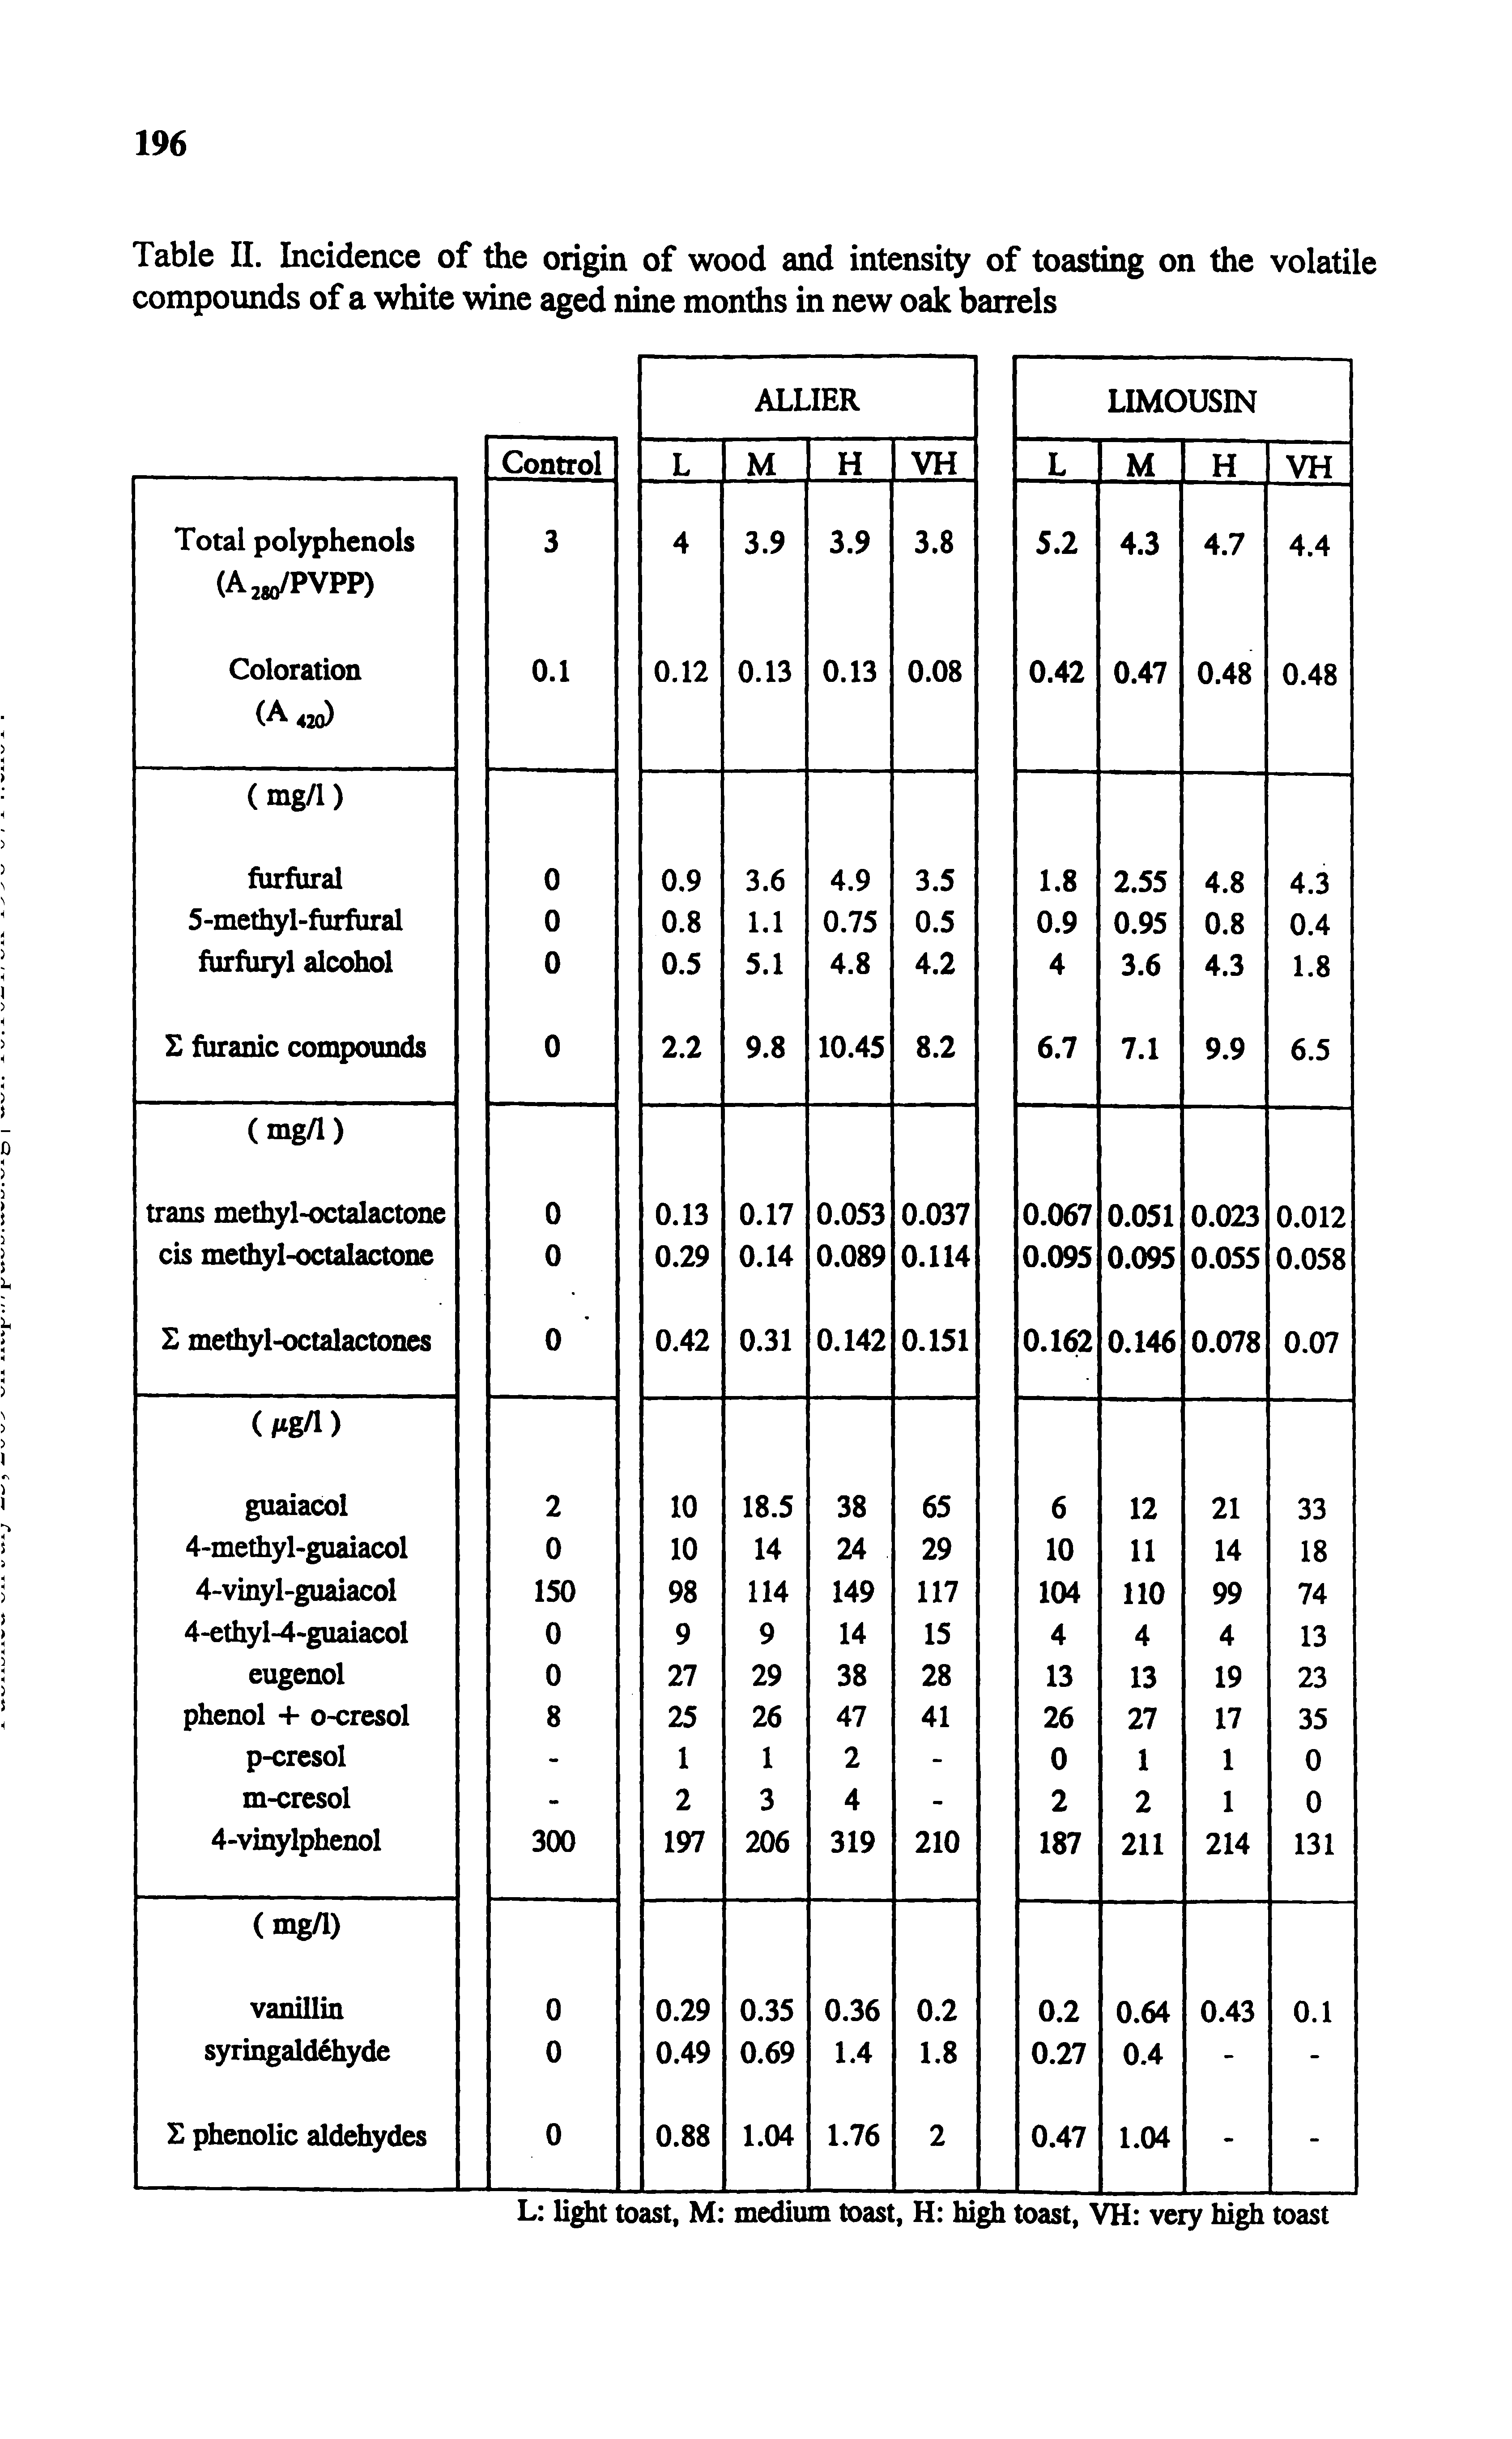 Table II. Incidence of the origin of wood and intensity of toasting on the volatile compounds of a white wine aged nine months in new oak barrels...